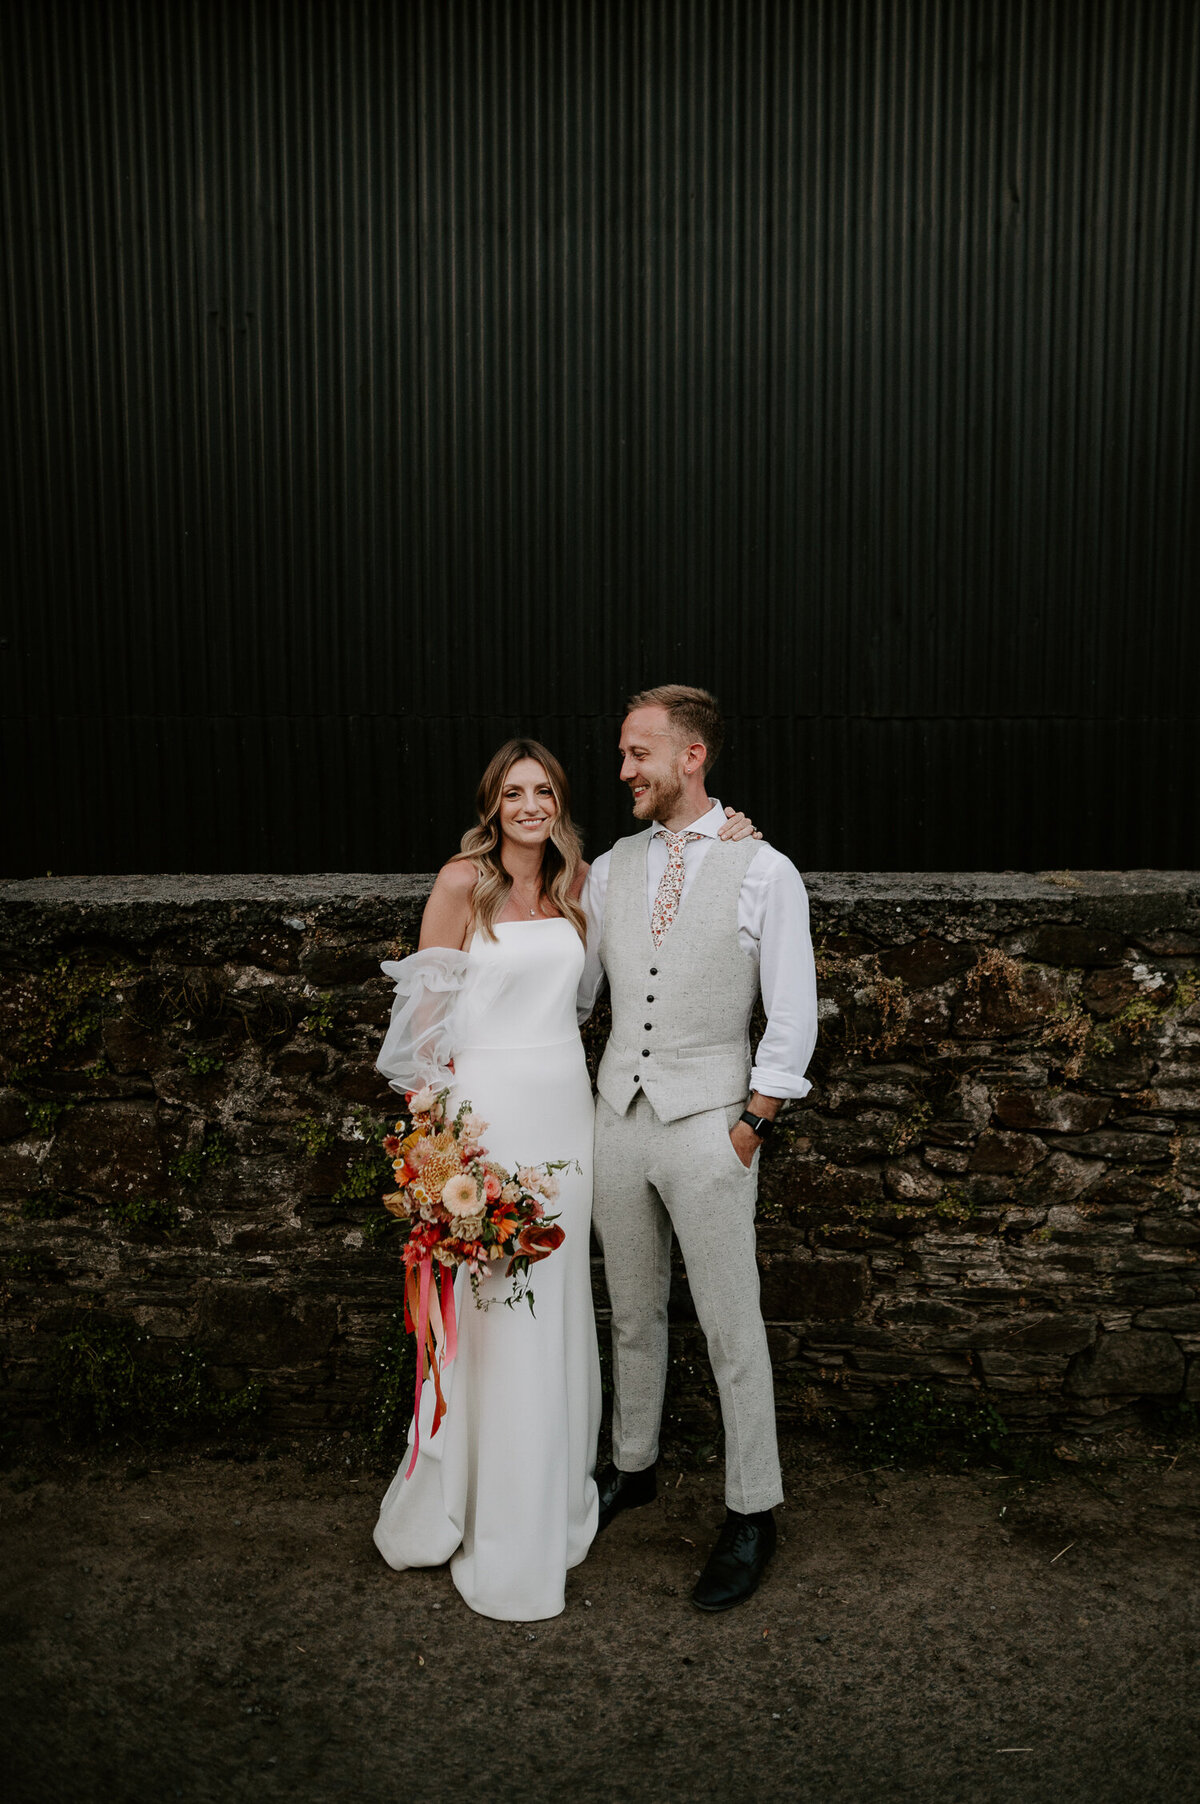 Carrying a large yellow and orange bouquet, a bride stands with her groom outside a black barn at Anran @ Tidwell Farm in Devon.